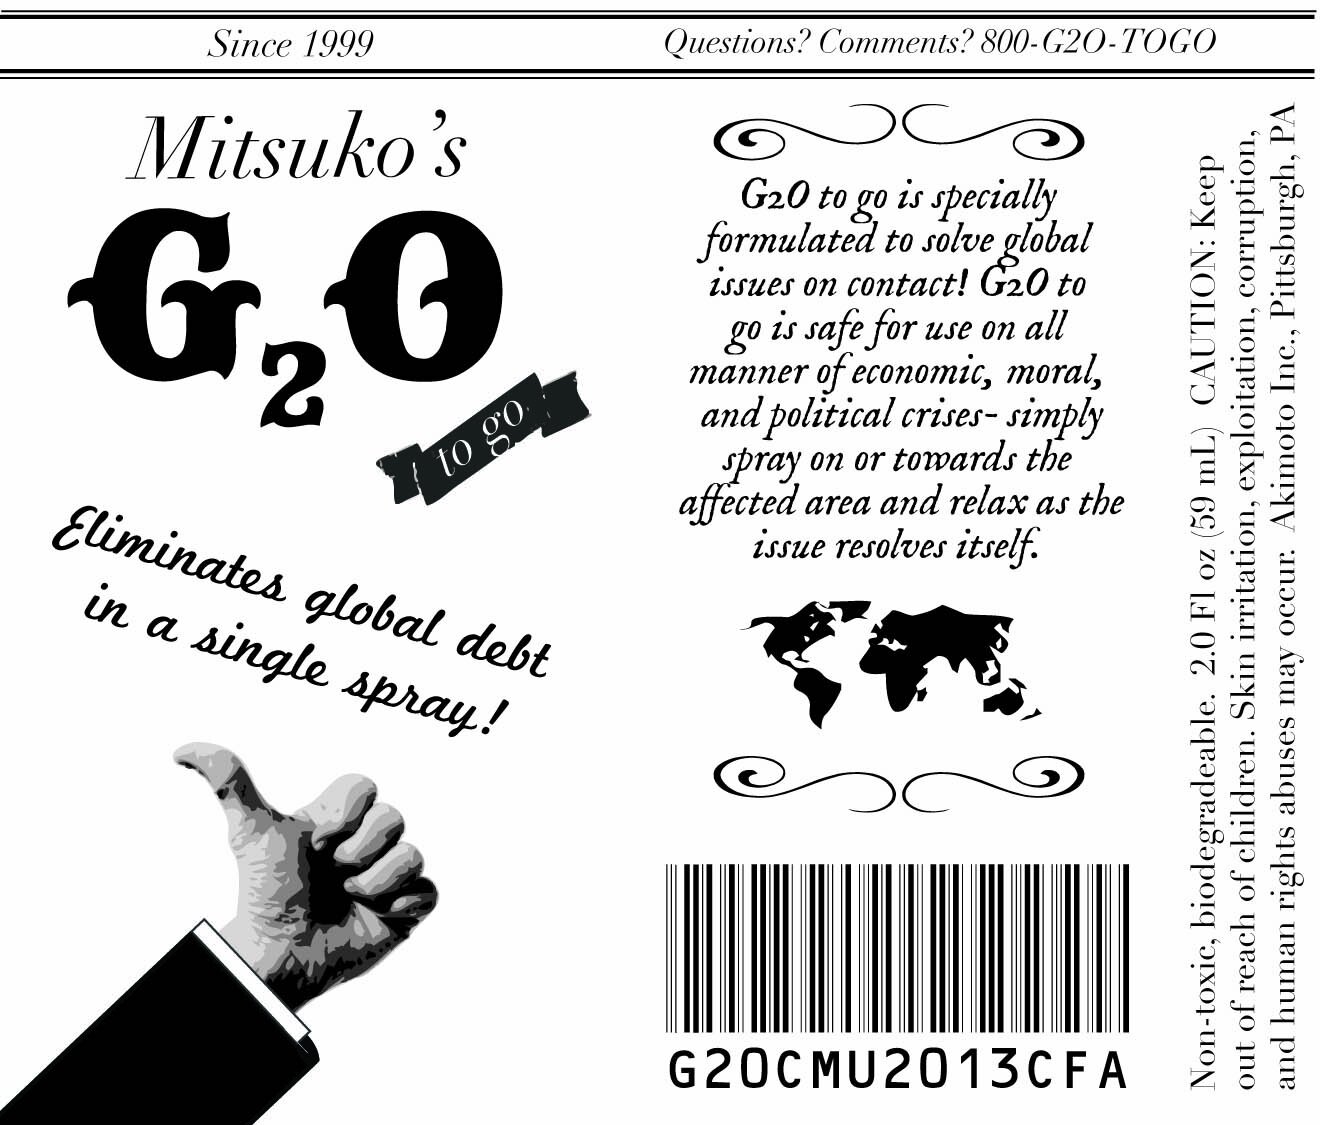 STUDENT PROJECT for the G20: G2O TO GO